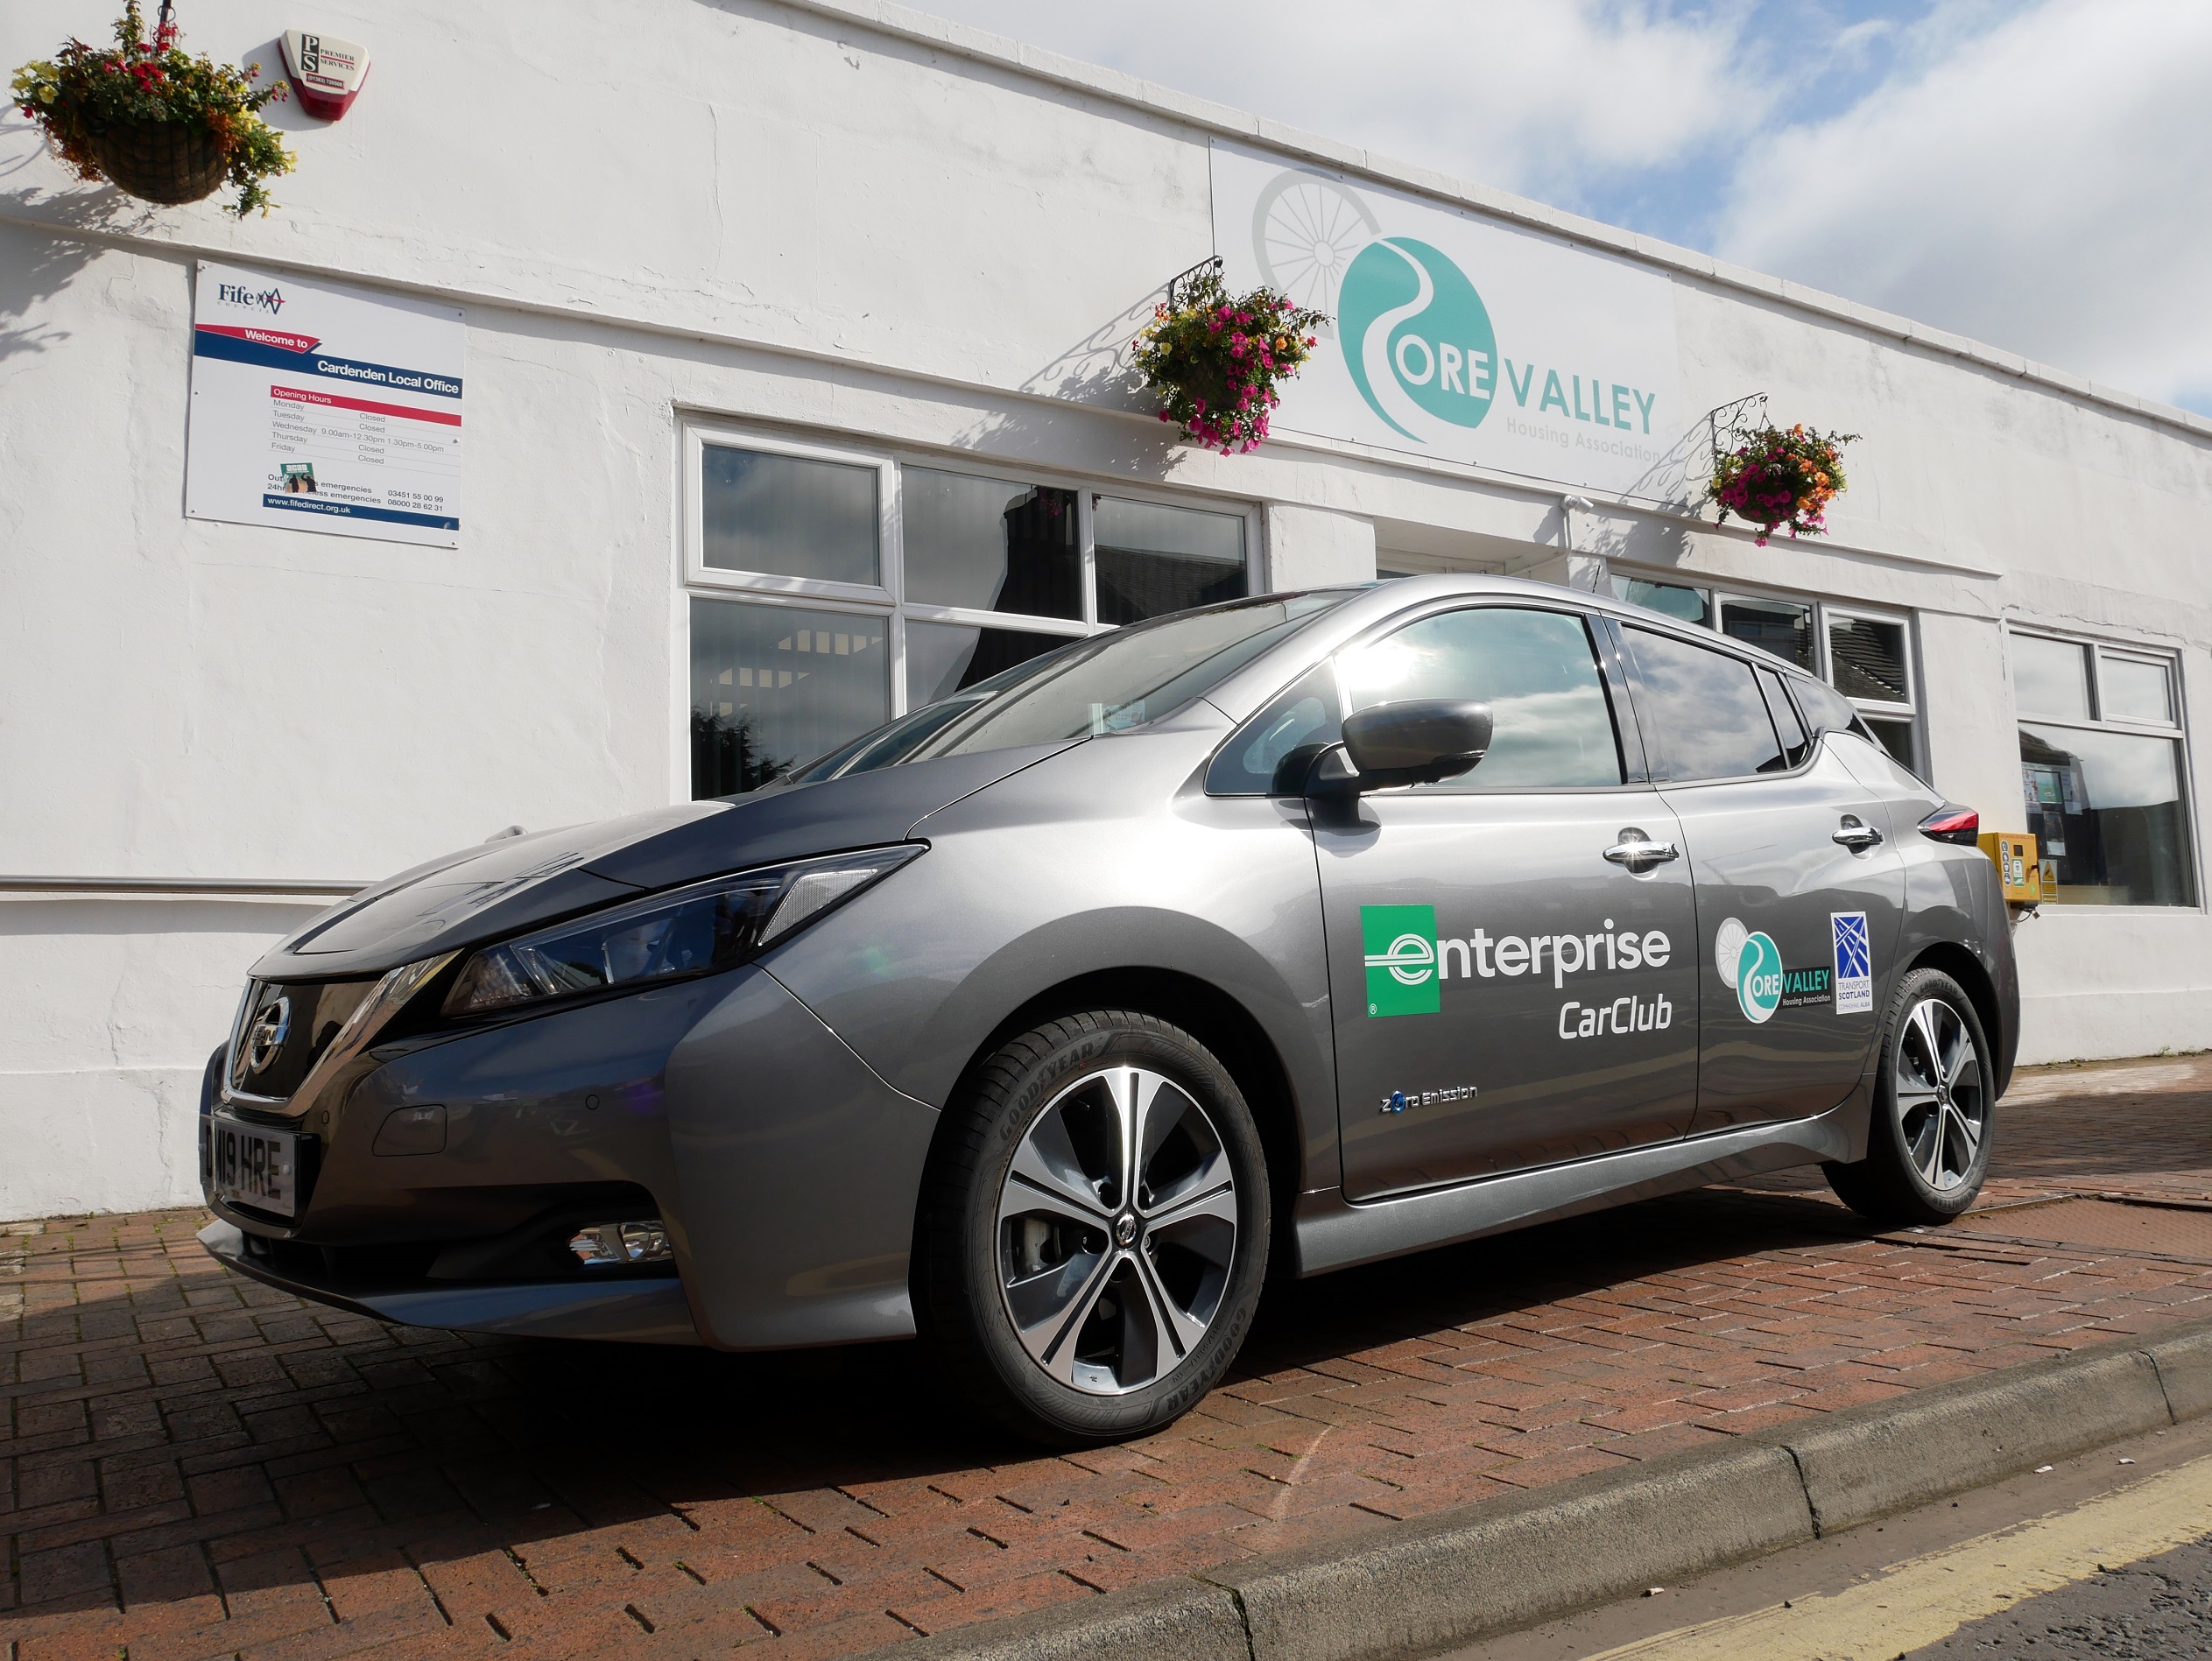 Ore Valley Housing Association launches Electric Car Club with Enterprise